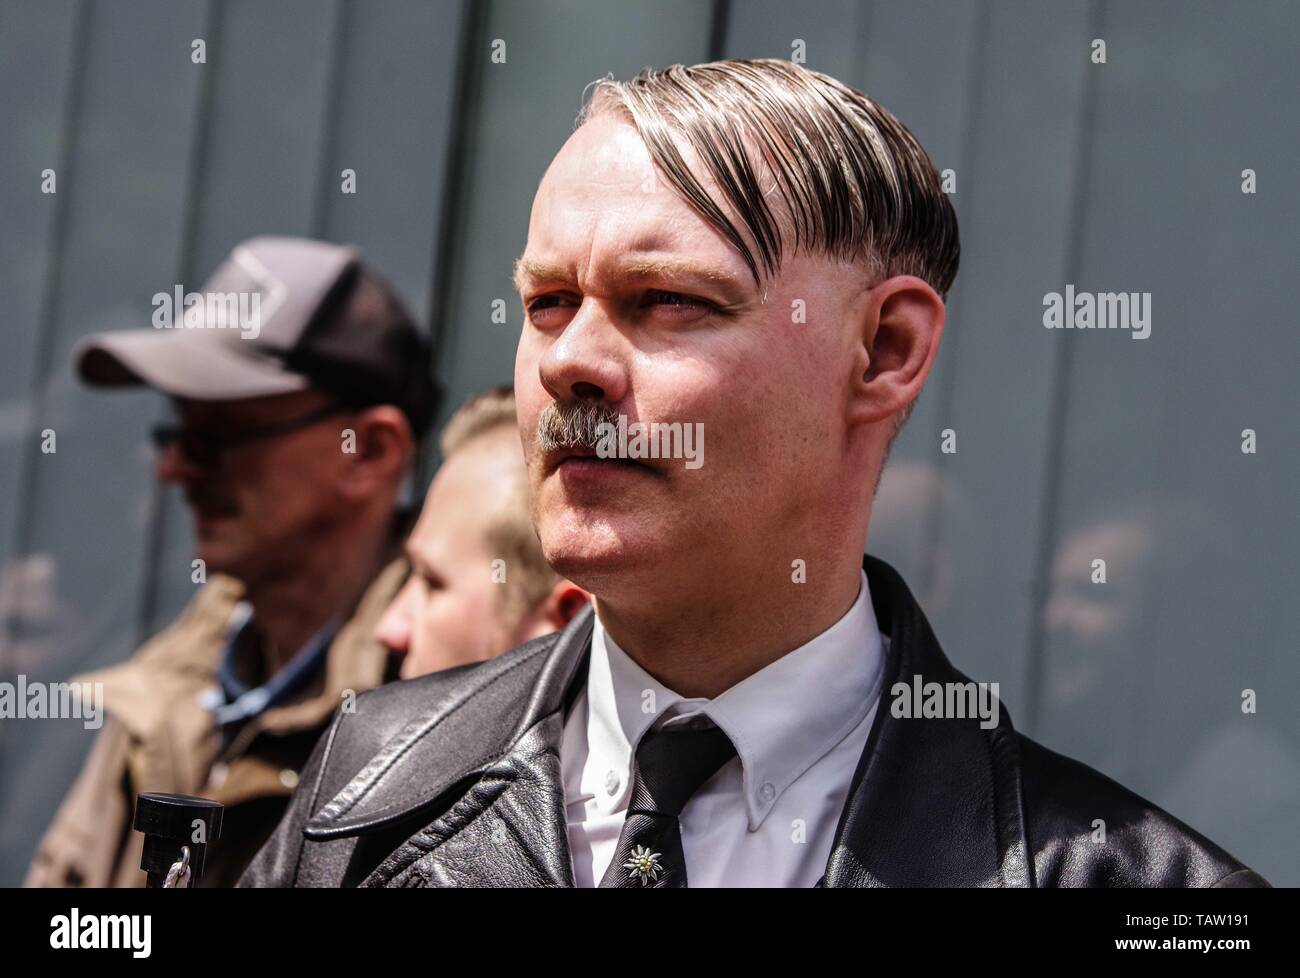 Dortmund, Nordrhein Westfalen, Germany. 25th May, 2019. A neonazi from The Netherlands has fashioned himself into the appearance of Adolph Hitler. On his tie is a pin of the Edelweiss flower, which was used by the SS and is still in use by the Gebirgsjaeger today. Prior to the European Elections, the neonazi party Die Rechte (The Right) organized a rally in the German city of Dortmund to promote their candidate, the incarcerated Holocaust denier Ursula Haverbeck. The demonstration and march were organized by prominent local political figure and neonazi activist Michael Brueck (Michael BrÃ¼ck Stock Photo